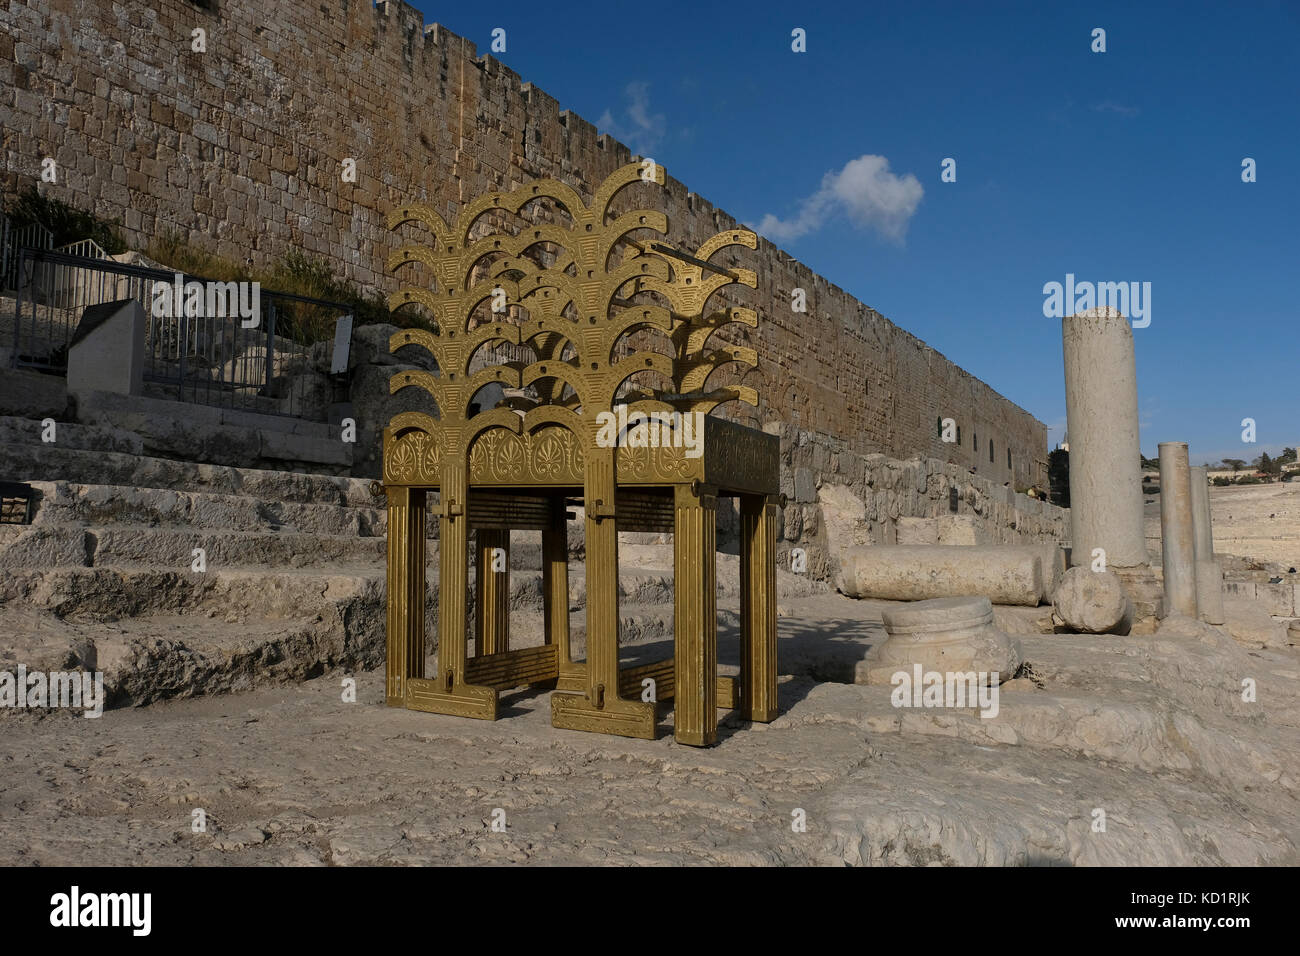 Model of the gilded Temple Showbread or in Hebrew Lechem Hapanim which was used during the Jewish holy temples period for ritual worship revived by the Jerusalem Temple Institute is seen at the southern wall of Haram al Sharif in the ancient Ophel ruins in Jerusalem Archeological Park, Old City East Jerusalem Israel on 08 October 2017. The Temple Institute known in Hebrew as Machon HaMikdash is an organization focusing on the endeavor of building the third Jewish Temple on the site currently occupied by the Dome of the Rock, and to reinstate sacrificial worship. Stock Photo